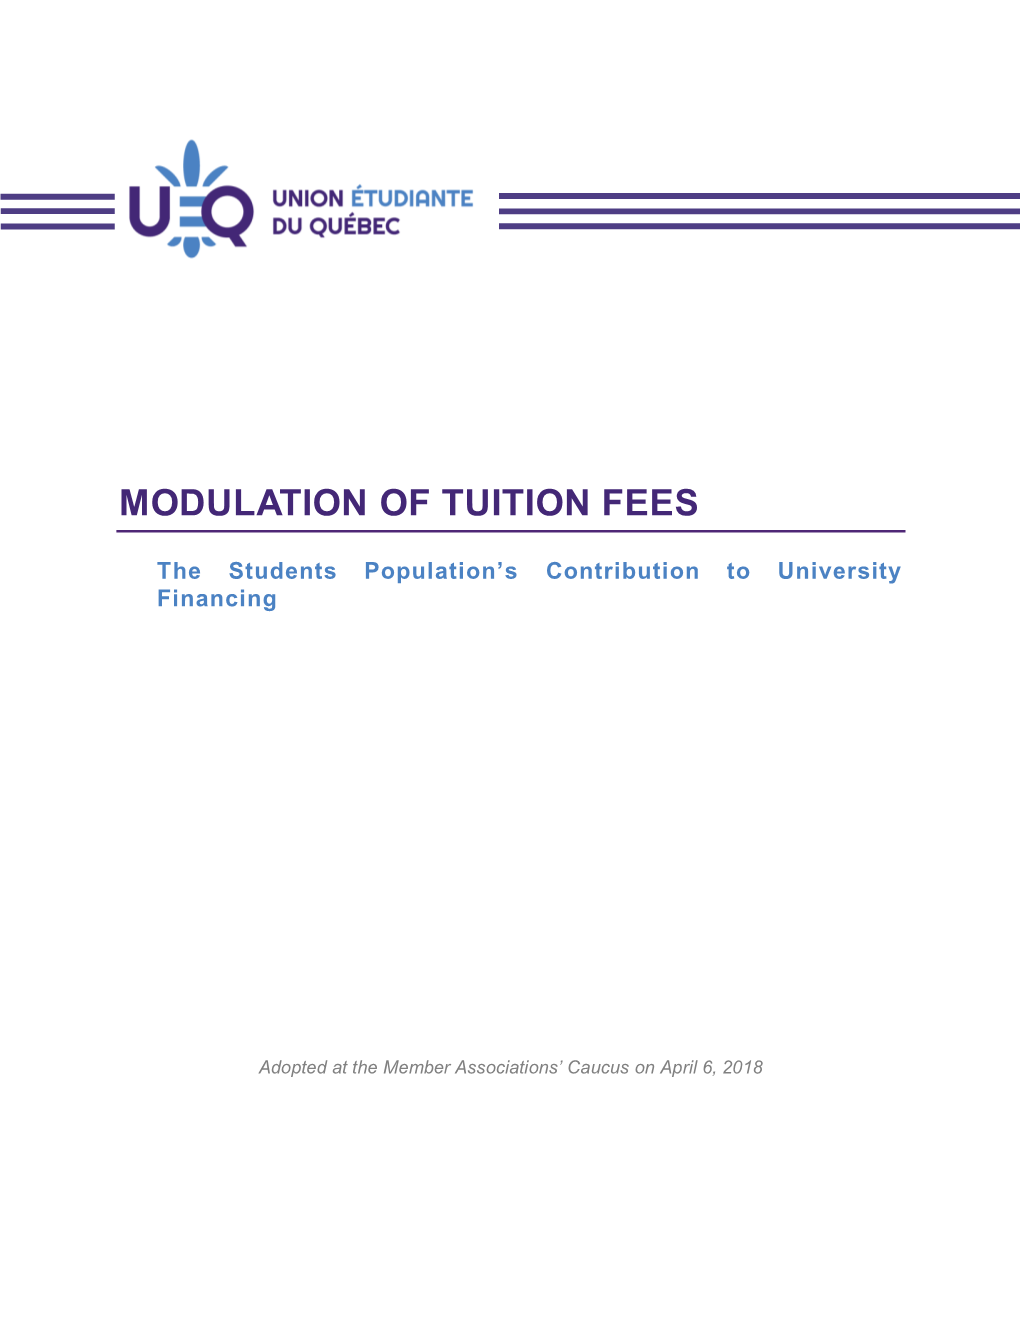 Modulation of Tuition Fees